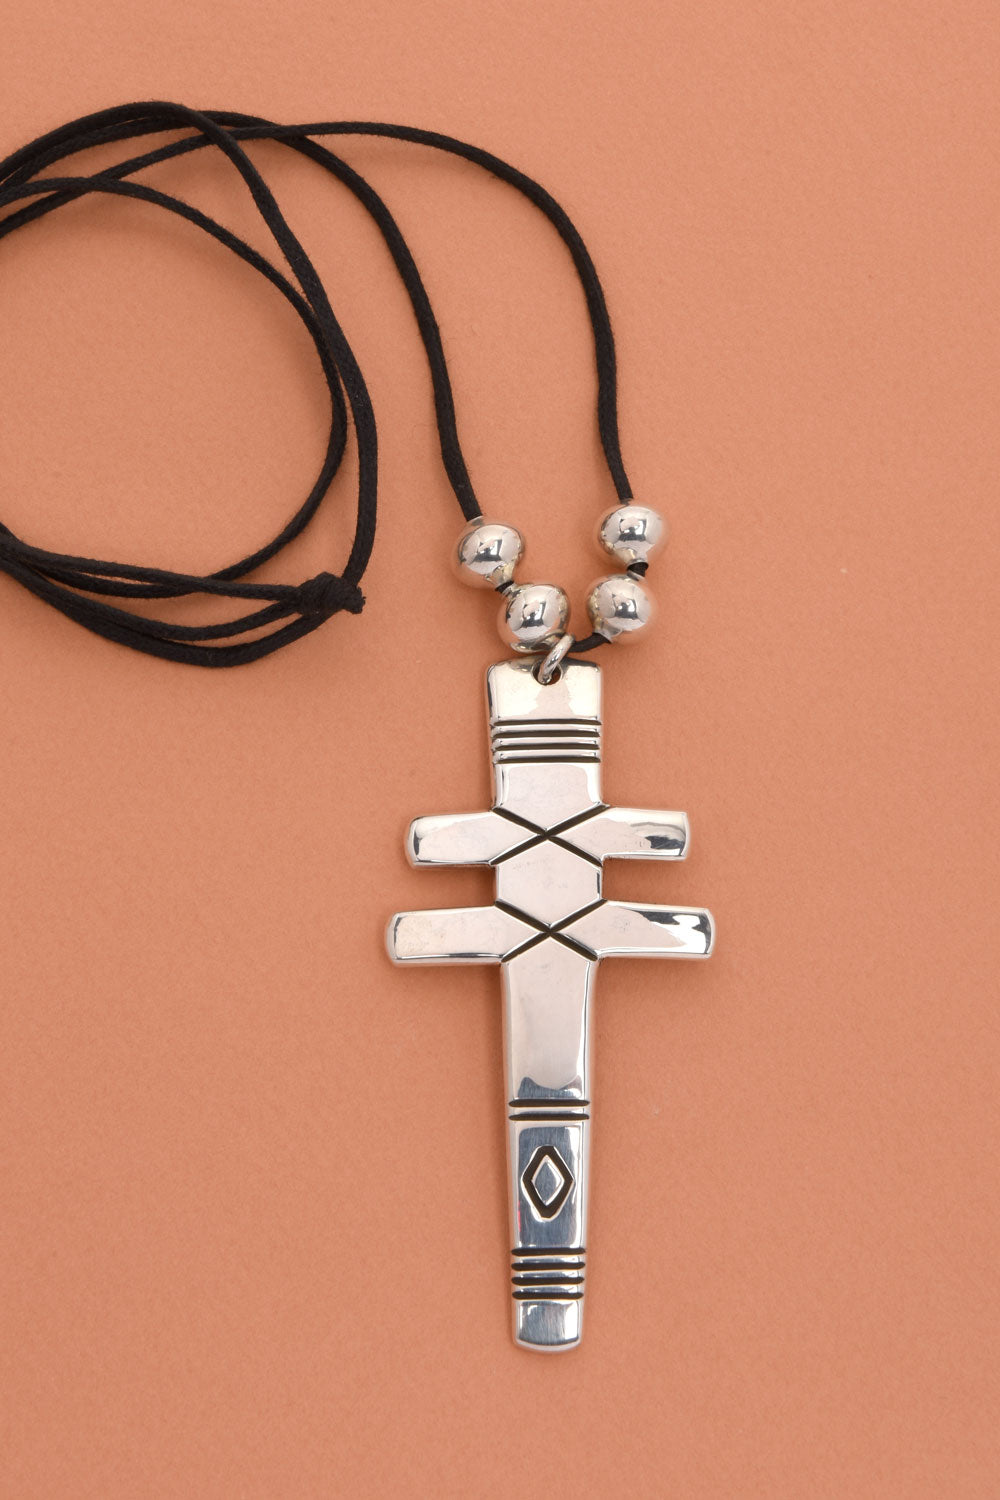 Cippy CrazyHorse Sterling Silver Cross Necklace